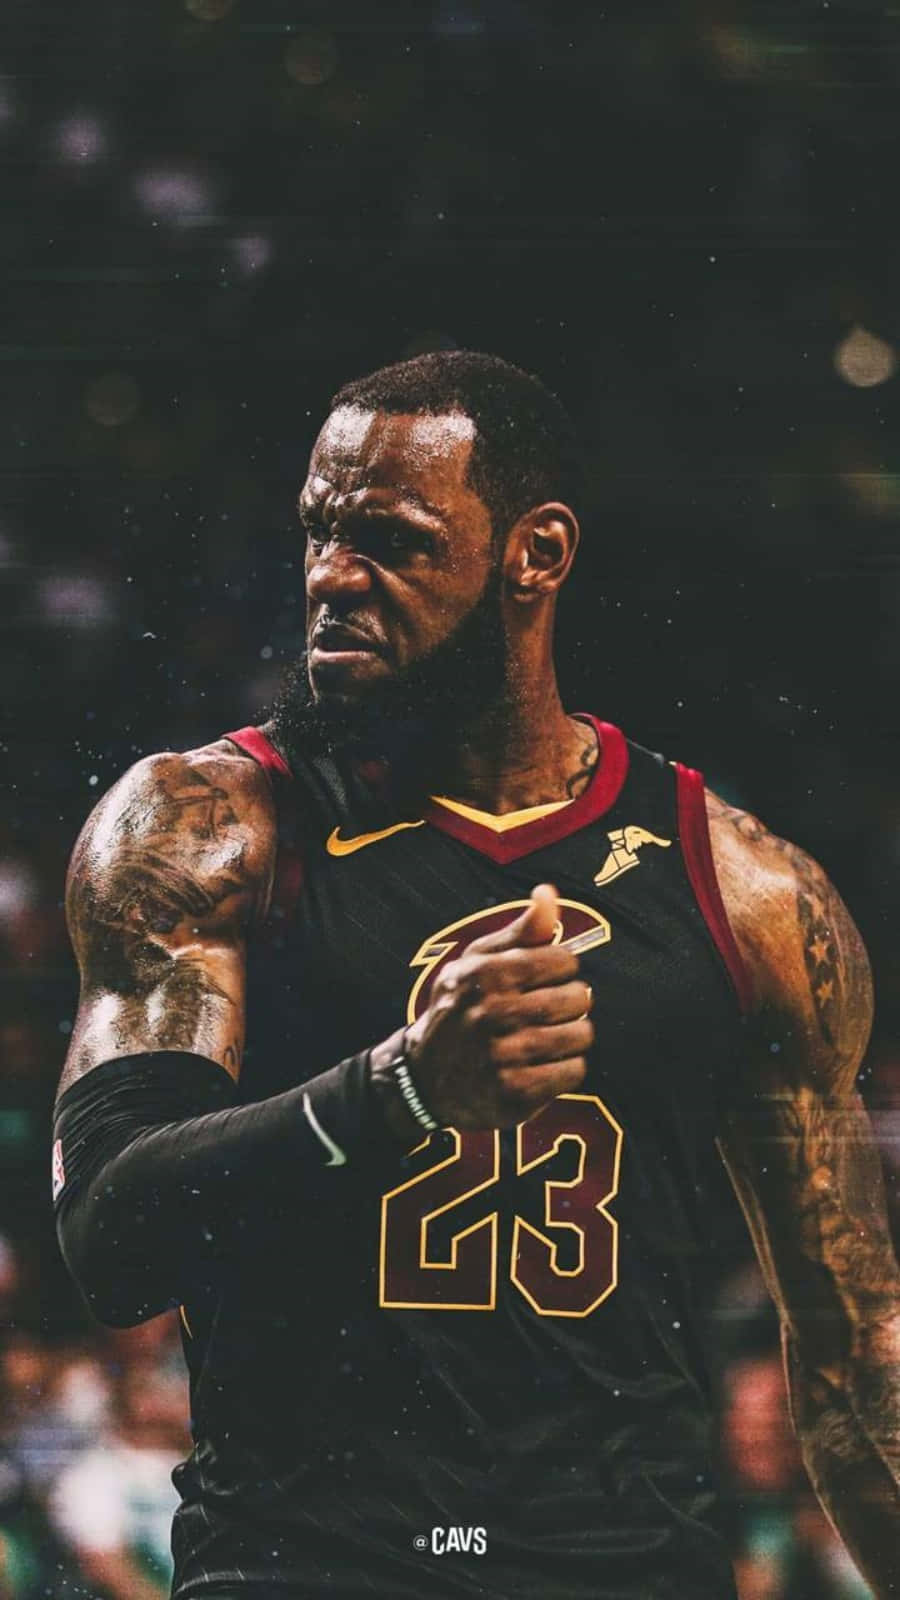 "Lebron James: A 3x NBA Champion on the Court and an Icon Off the Court"